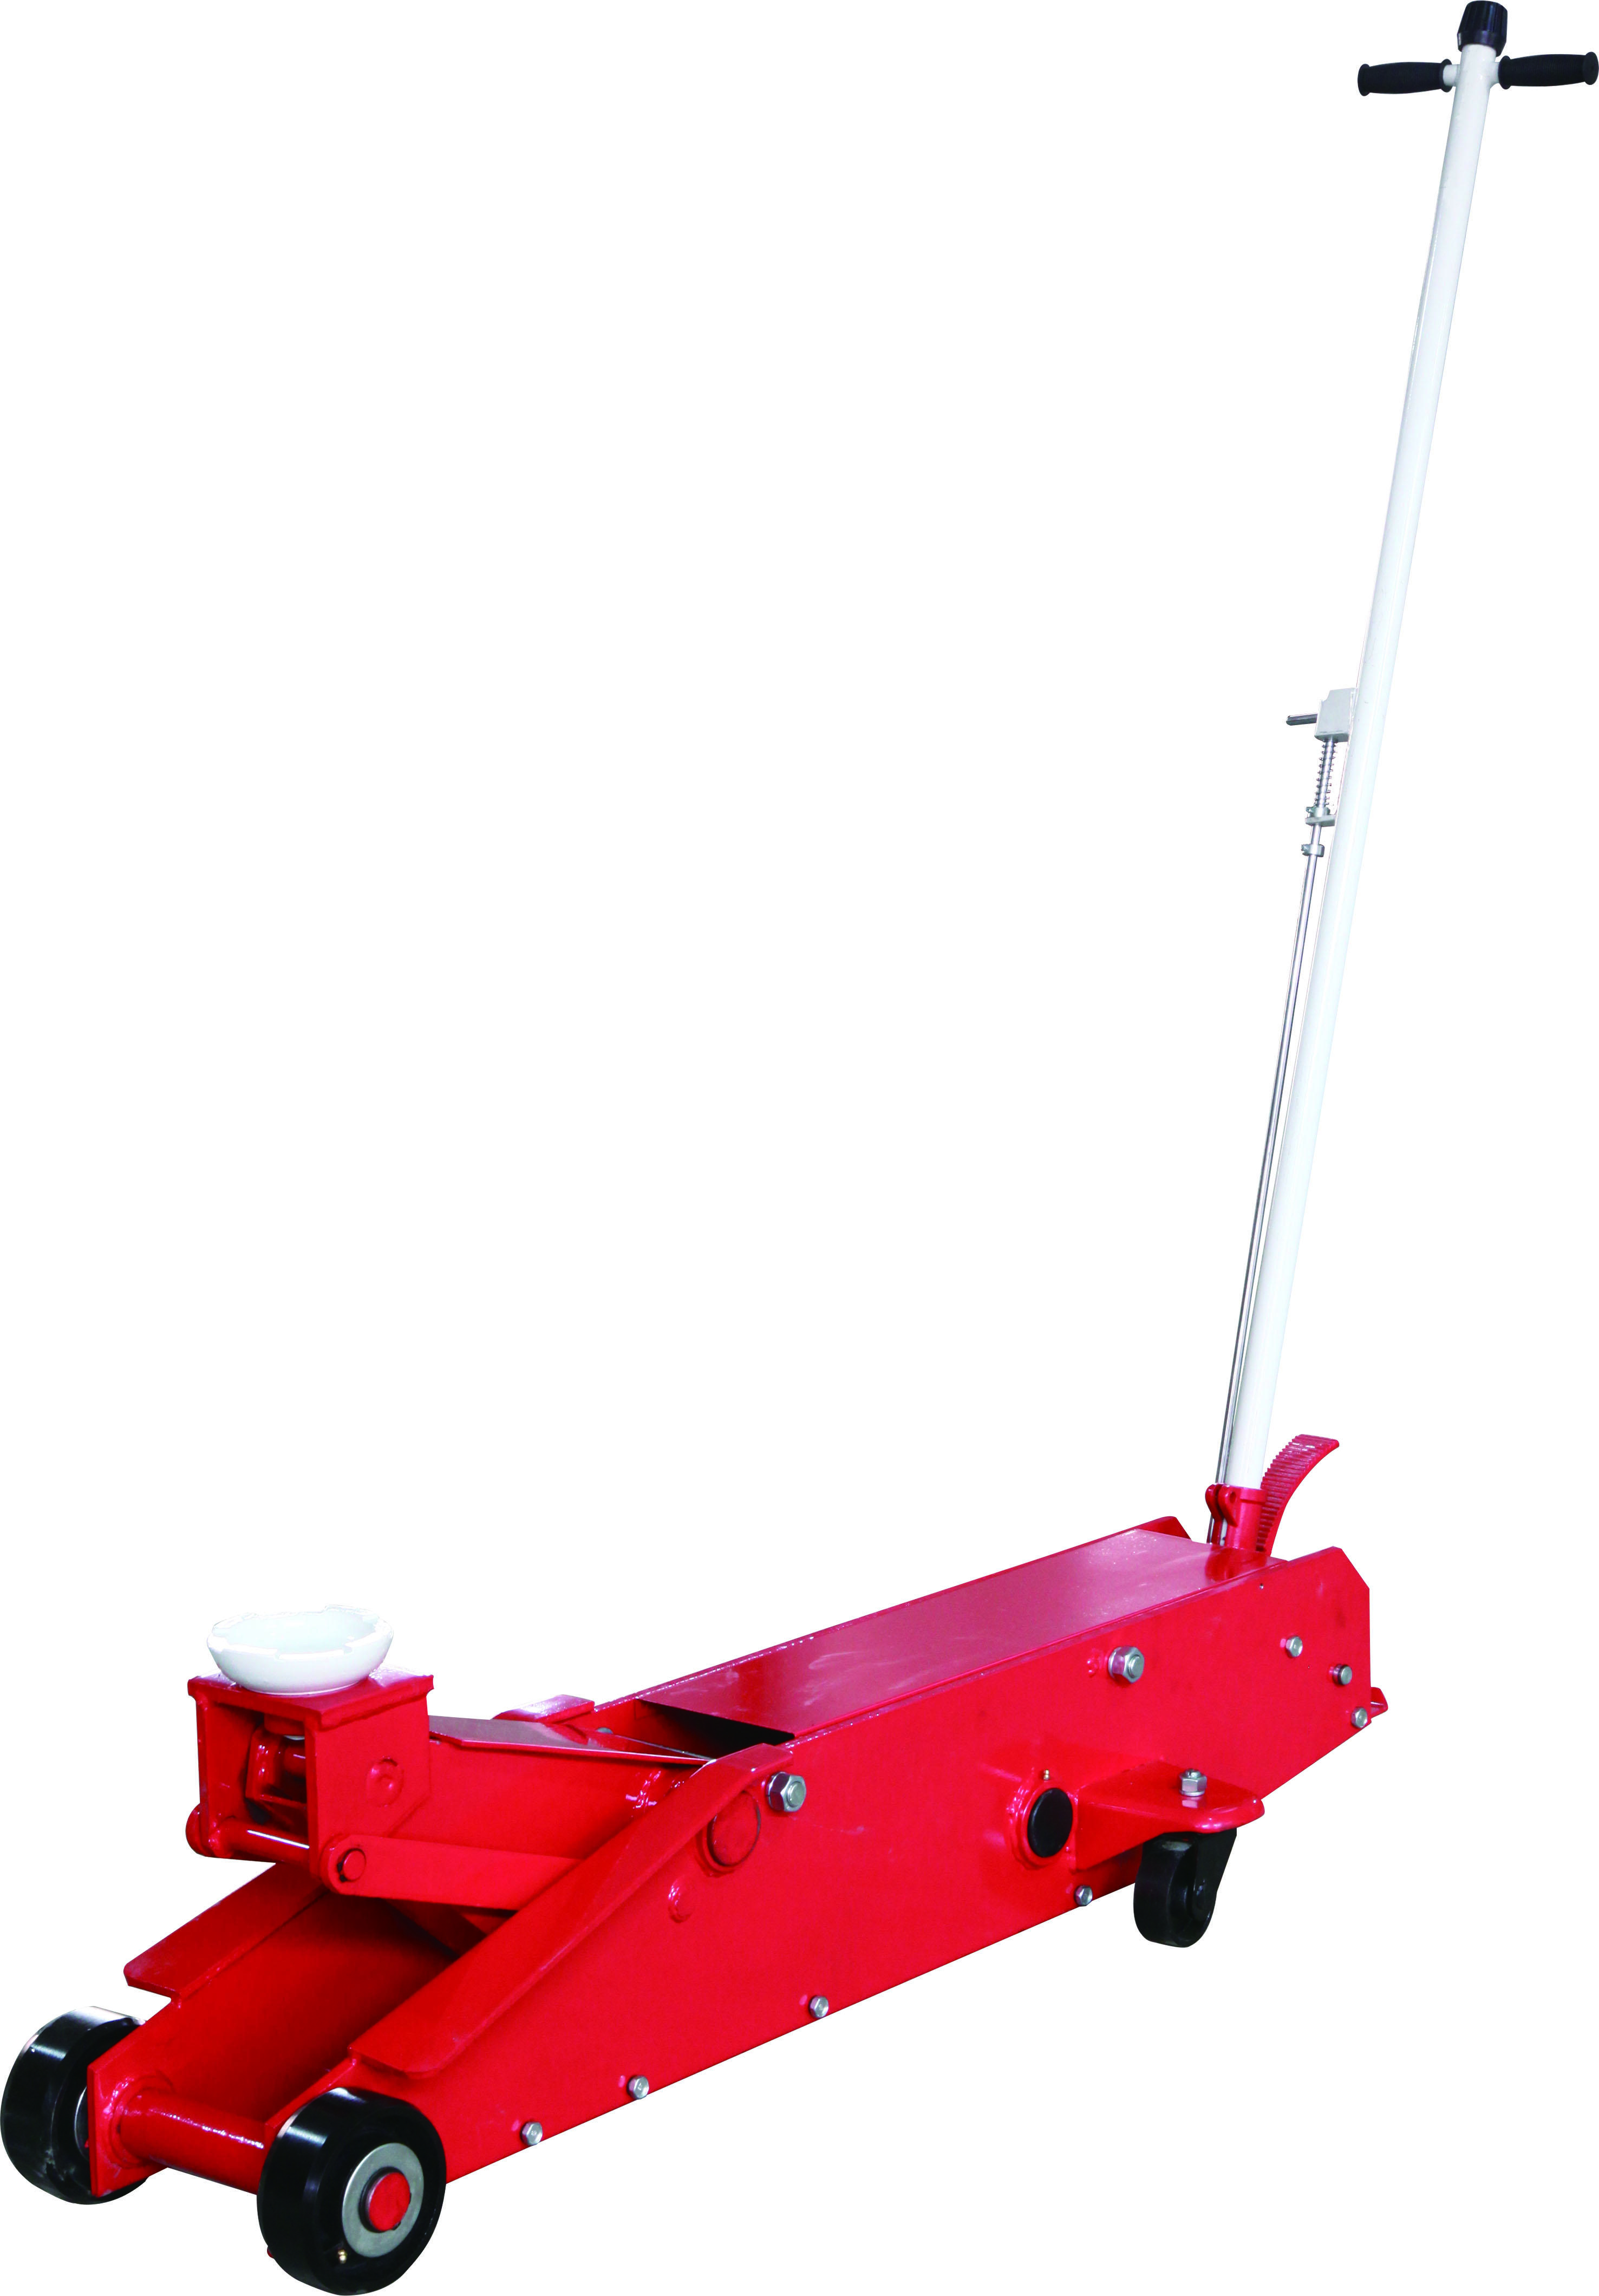 LONG CHASSIS SERVICE JACK